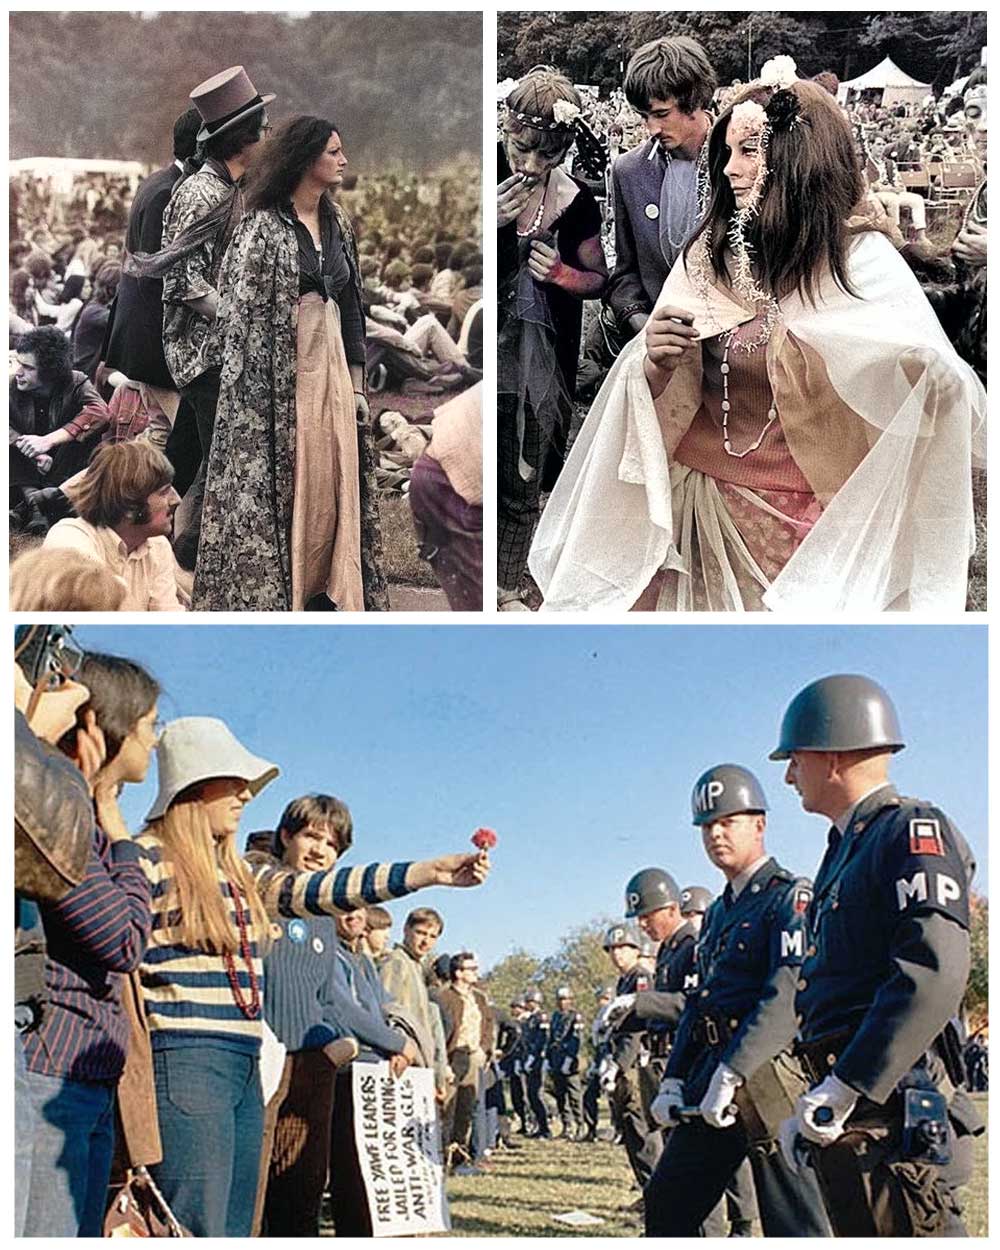 Boho Fashion Style in the 60s hippie movement